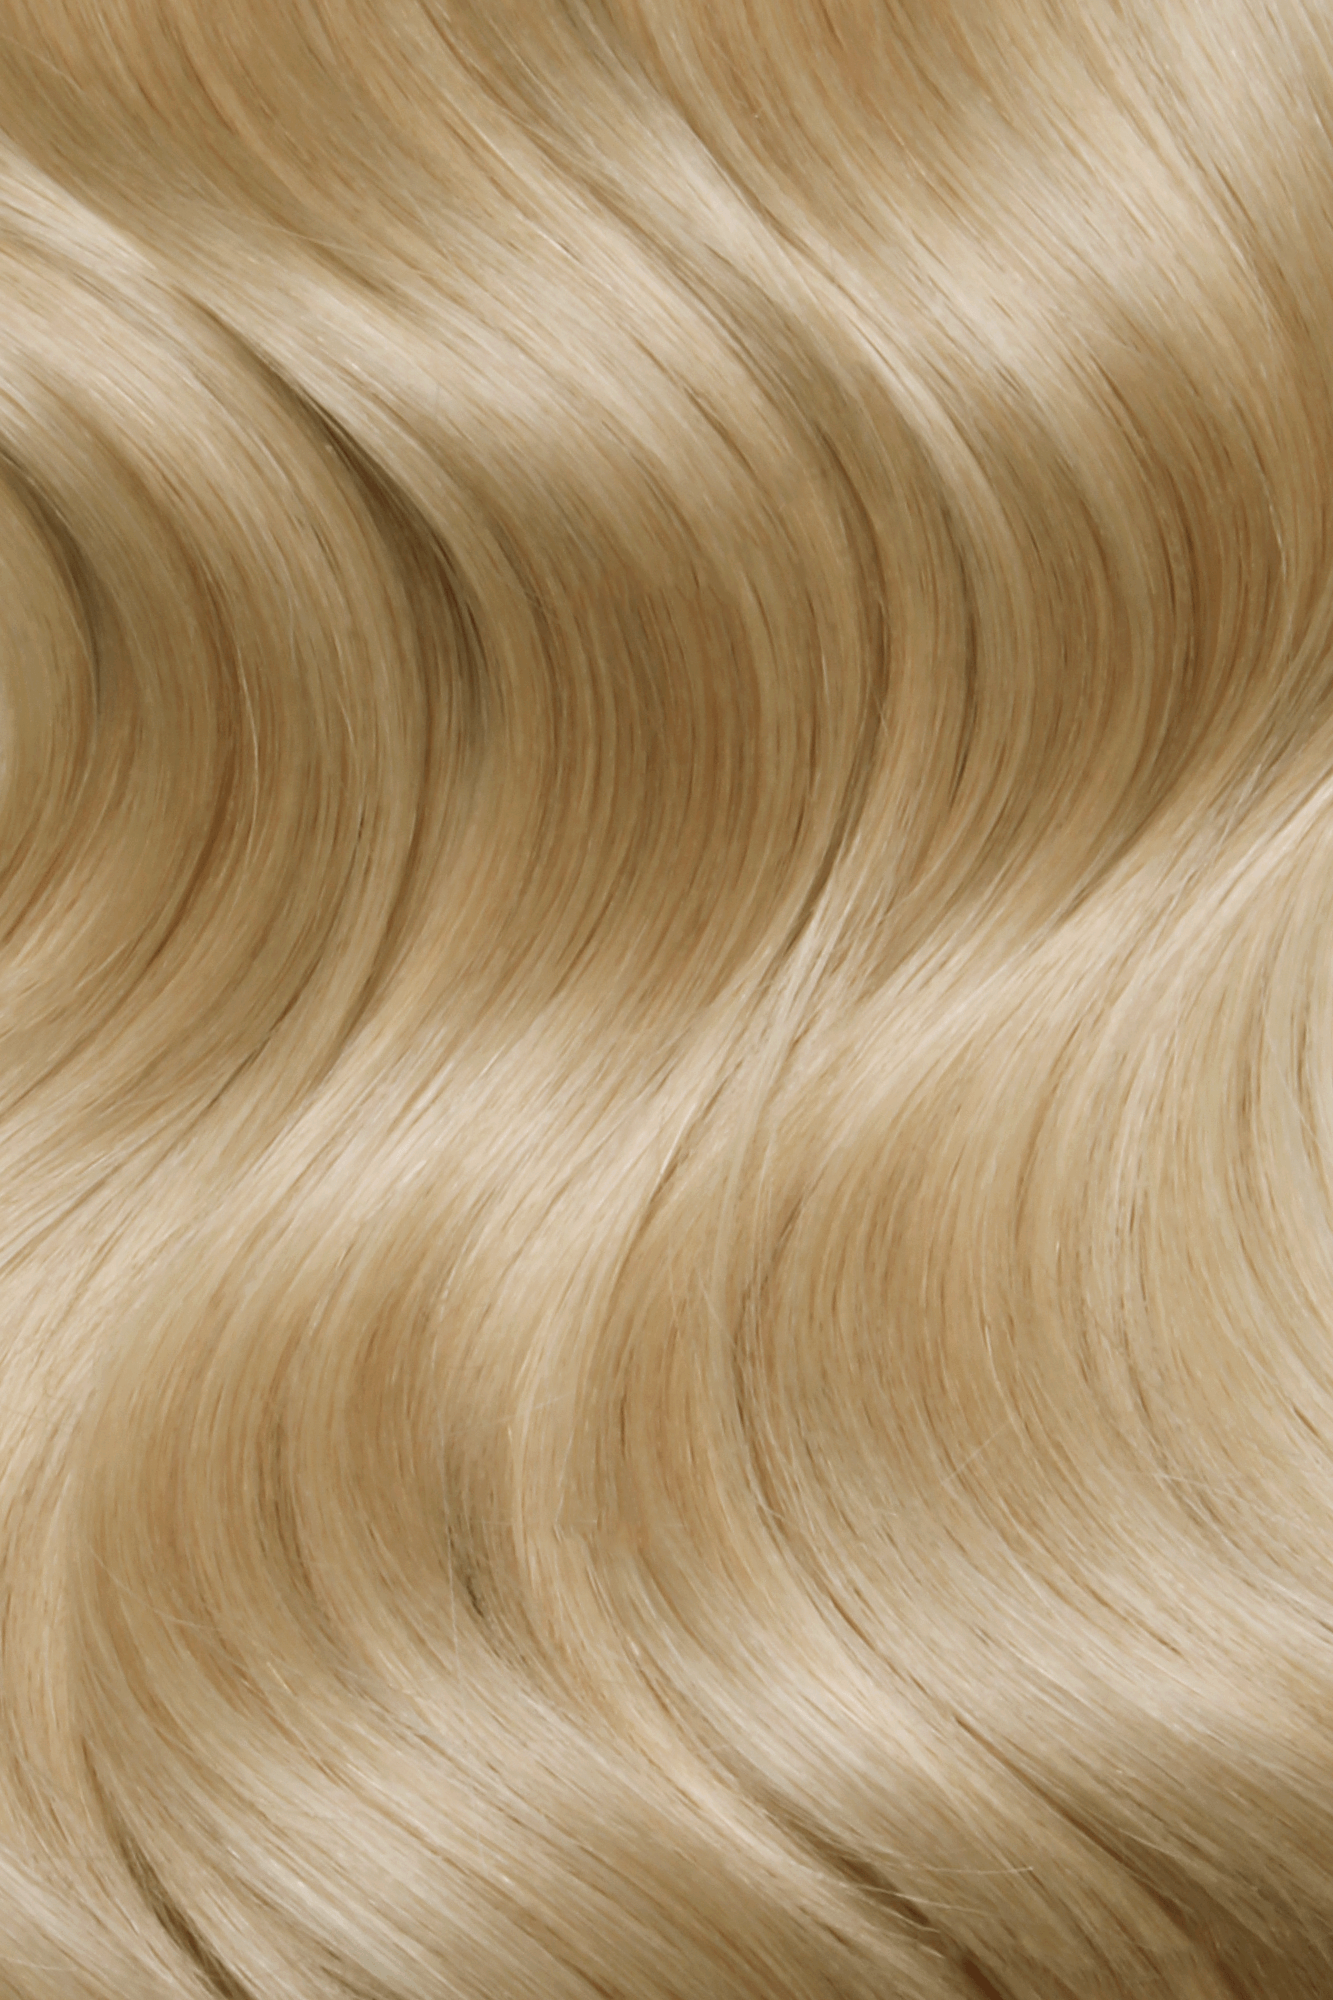 SEAMLESS® Tapes 16 Inches - SWAY Hair Extensions Natural-Ash-Blonde-20 clip-in hair extensions made of 100% Double Drawn, Remy Human Hair. SWAY SEAMLESS® Tapes, 16 inches. Lightweight, flexible, and perfect for any hairstyle.